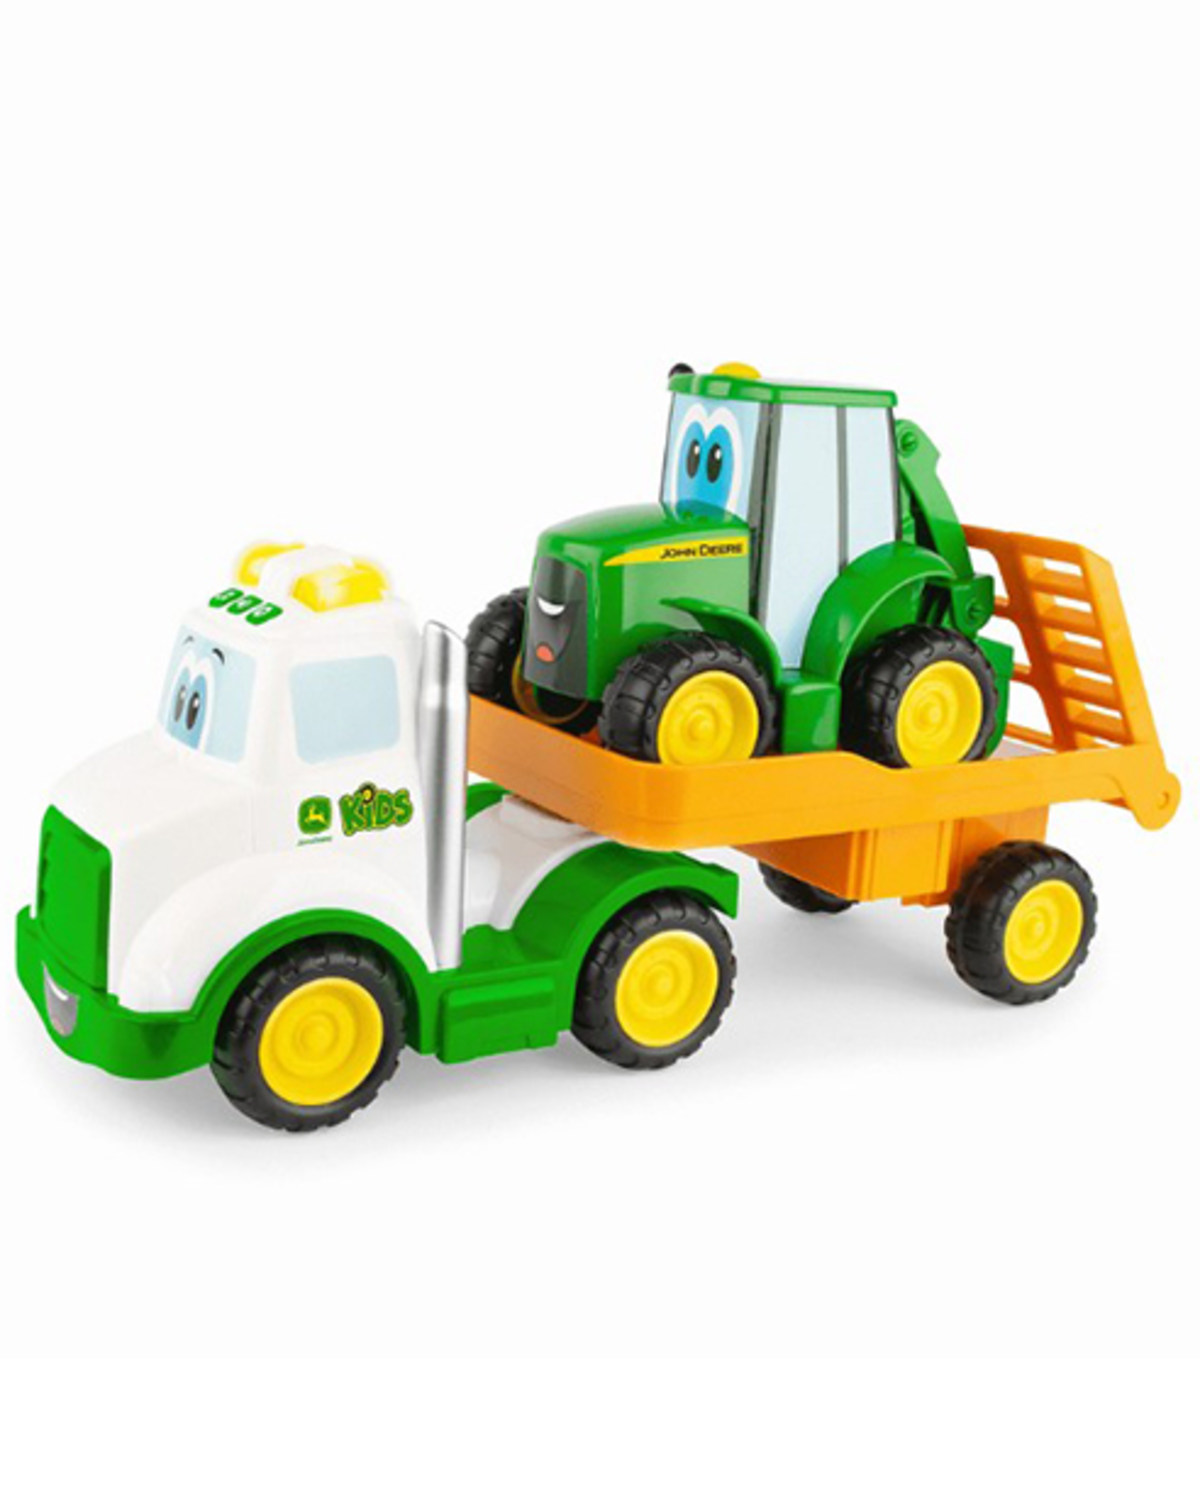 John Deere Lights & Sounds Farmin' Friends Toy Hauling Set with Truck and Backhoe Tractor